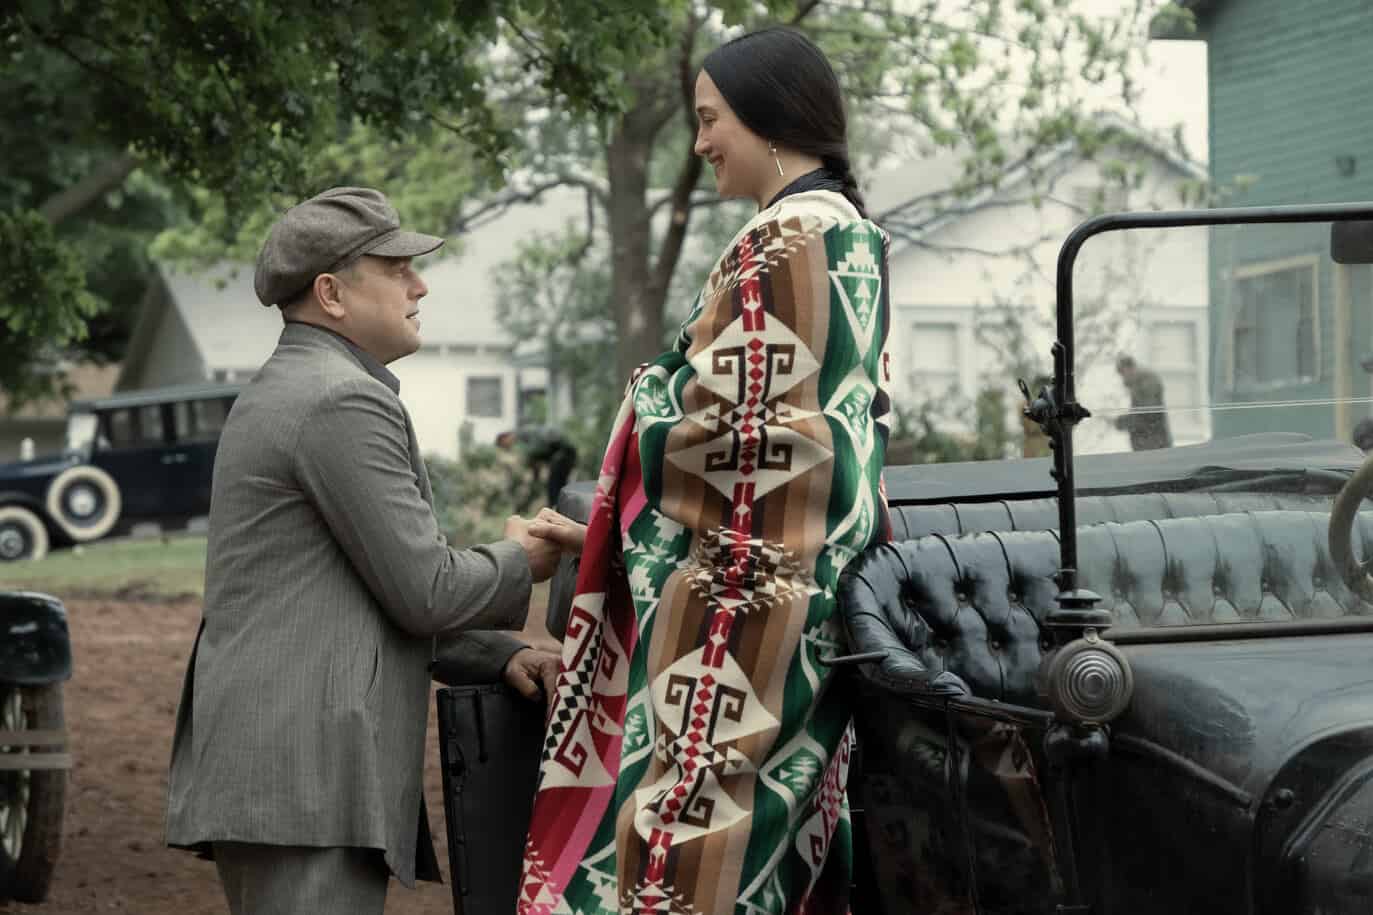 A man in a suit and cap helping a Native American woman out of a vintage car in this image from Apple Studios.